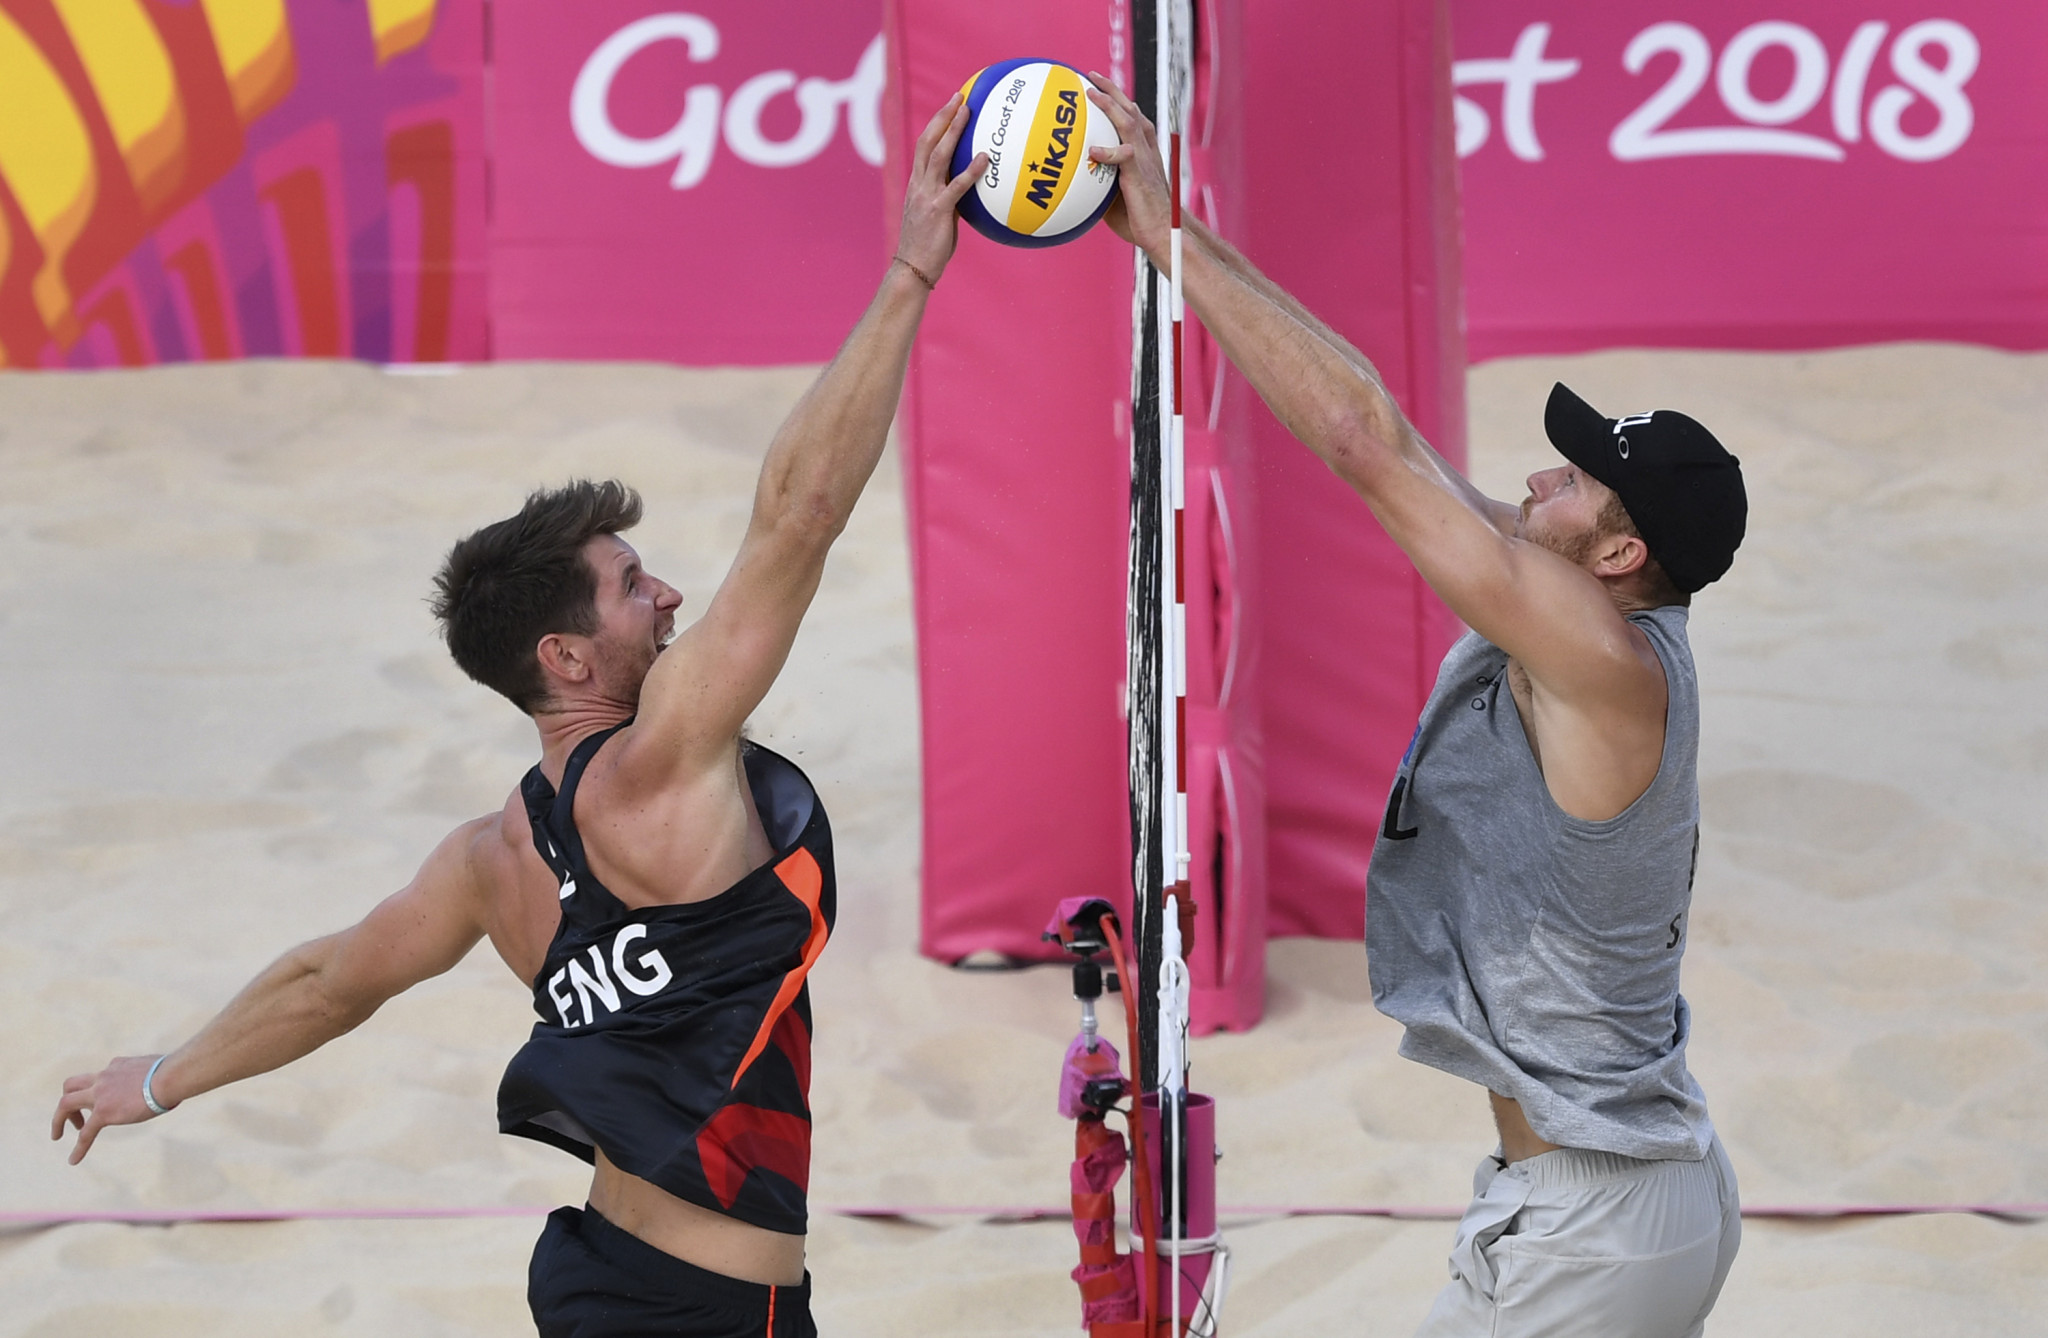 Birmingham 2022 beach volleyball could take place in city centre as organisers seek "iconic" location